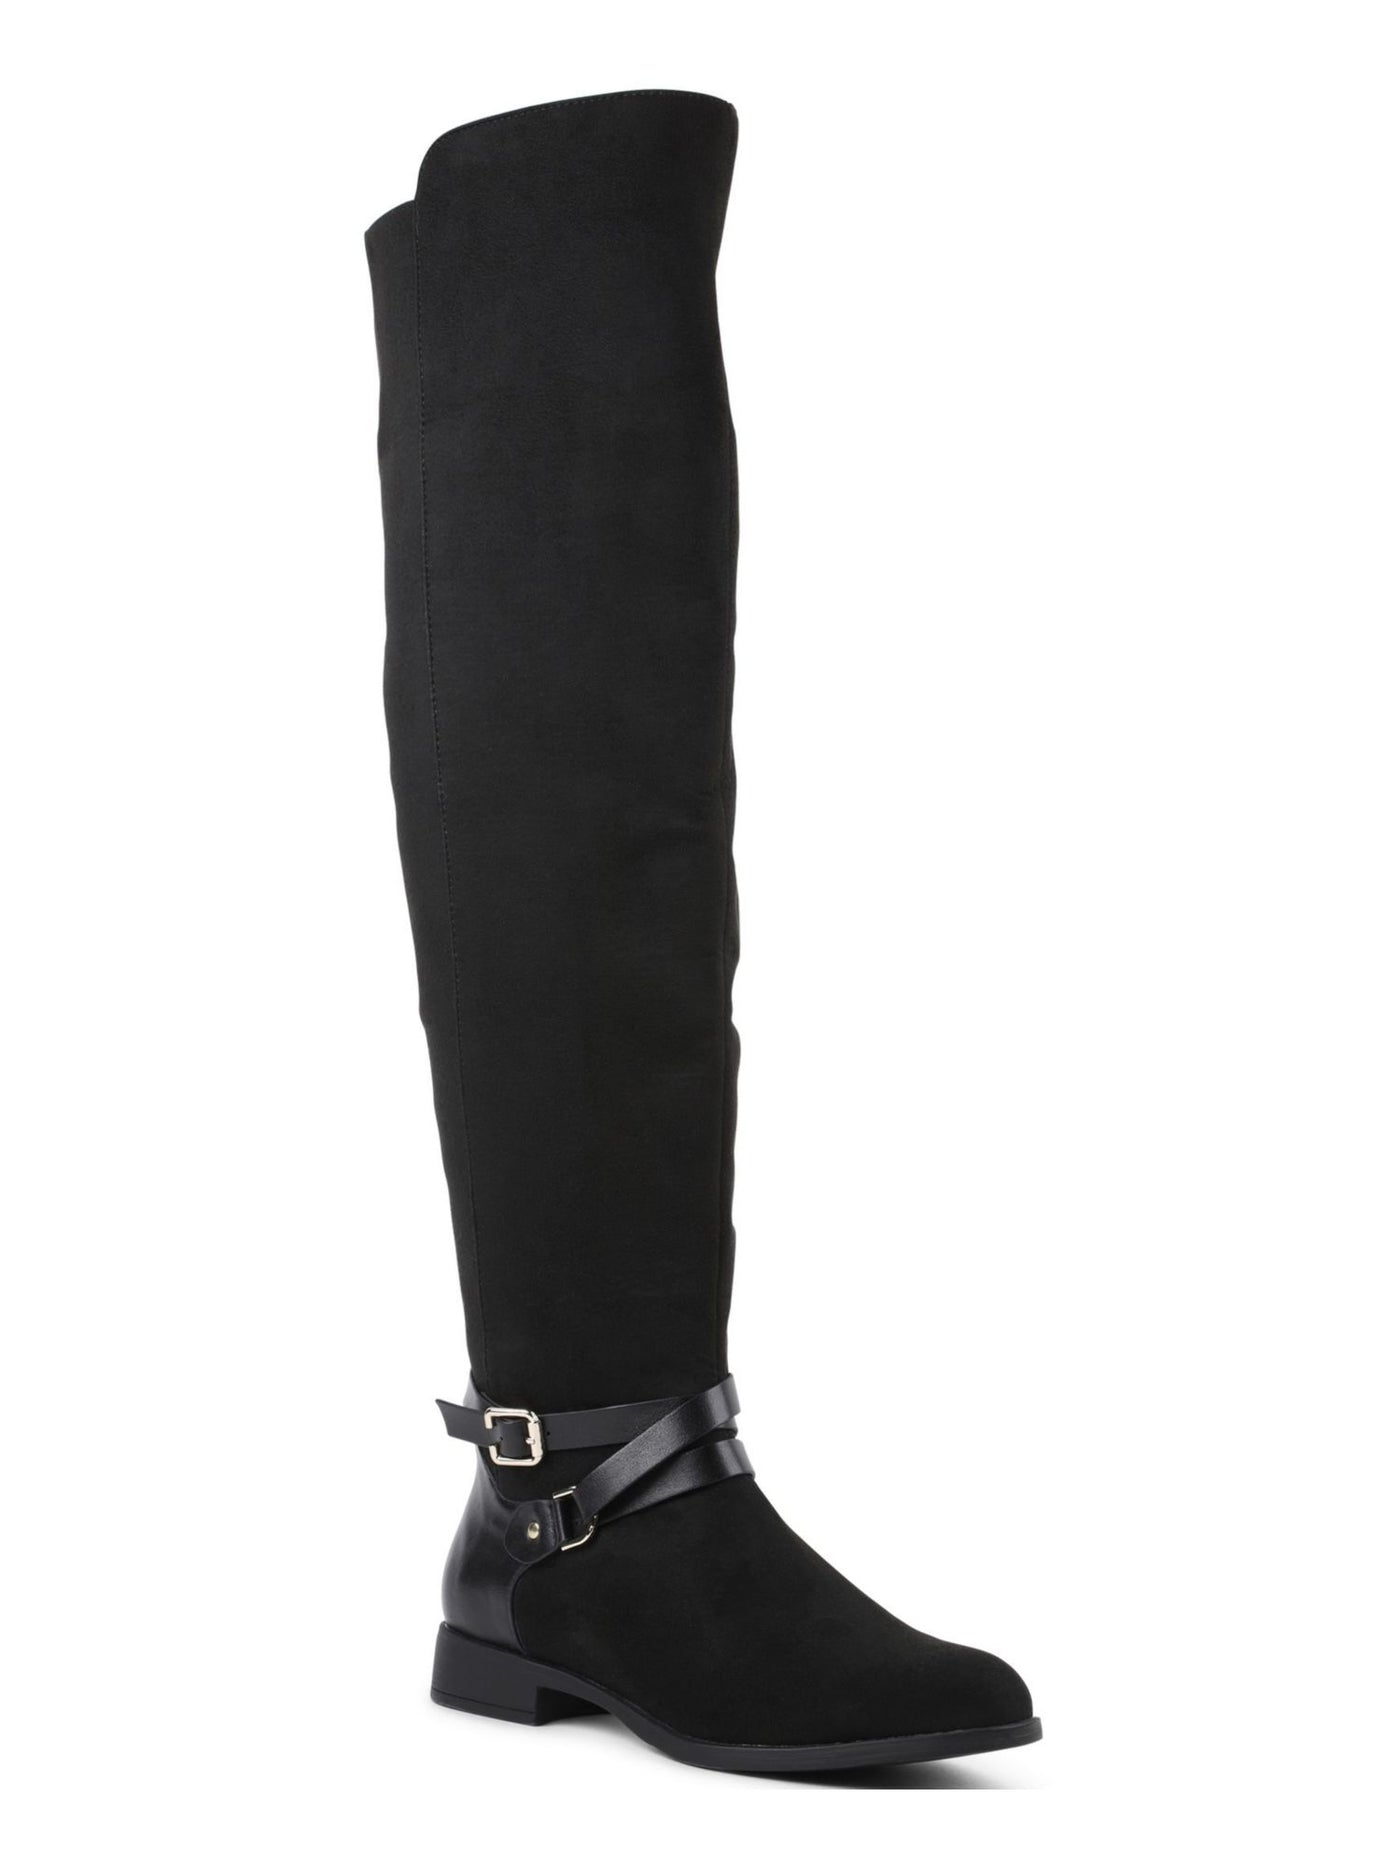 XOXO Womens Black A Line Gore Buckle Accent Cushioned Thames Almond Toe Block Heel Zip-Up Boots Shoes 7 M